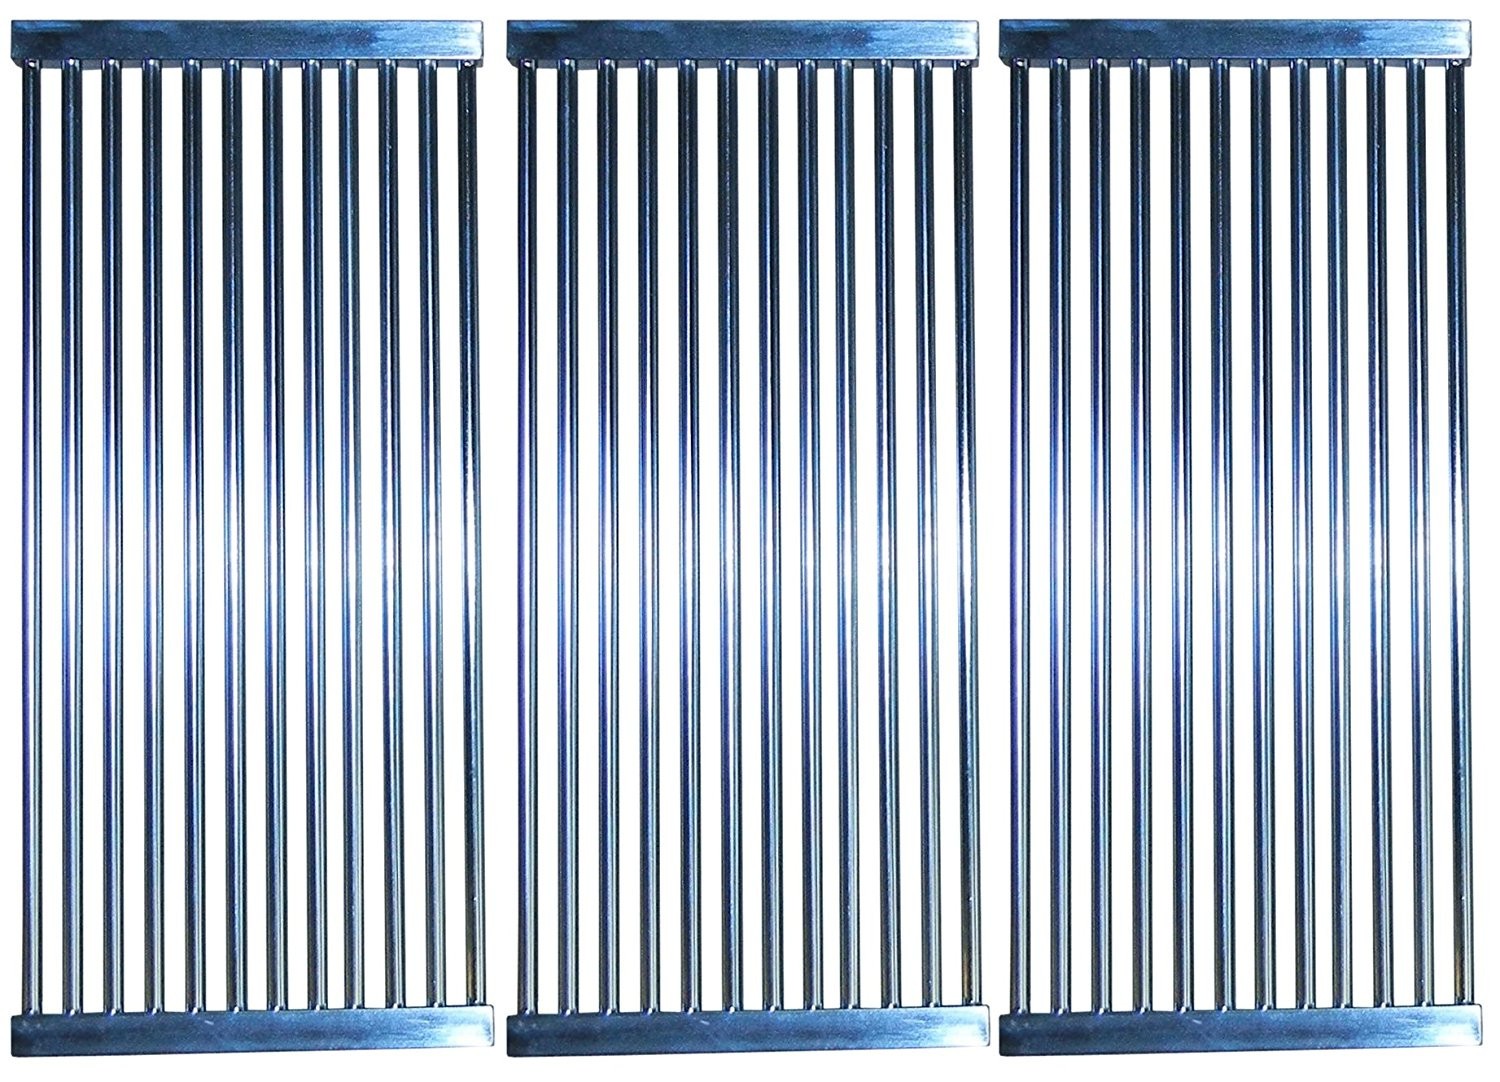 Stainless steel tubes cooking grid for Kenmore brand gas grills